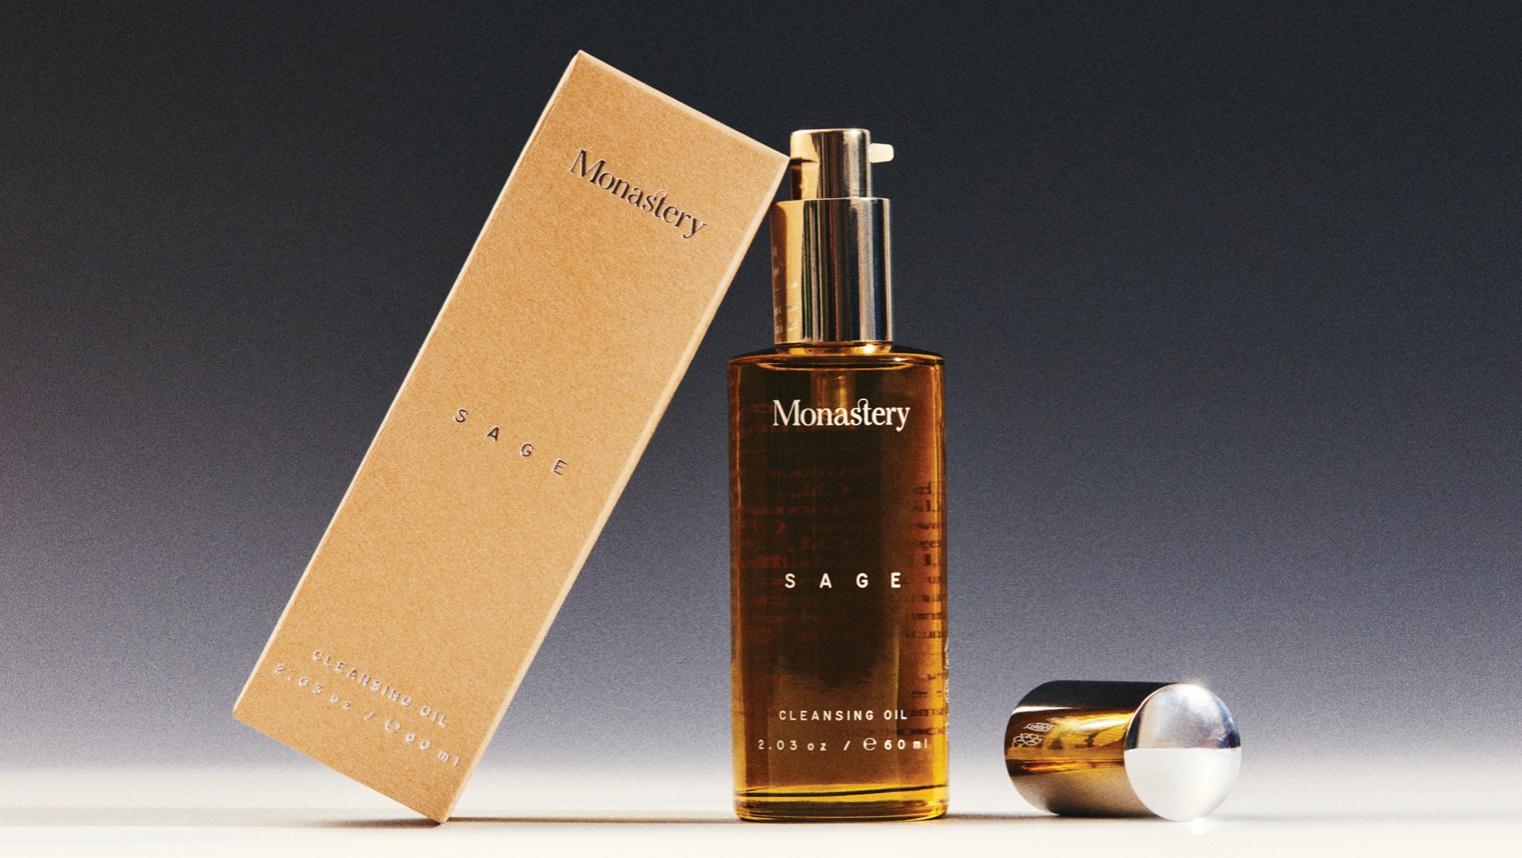 Monastery’s Luxe Packaging Visually Highlights The Purity Of The Ingredients Within